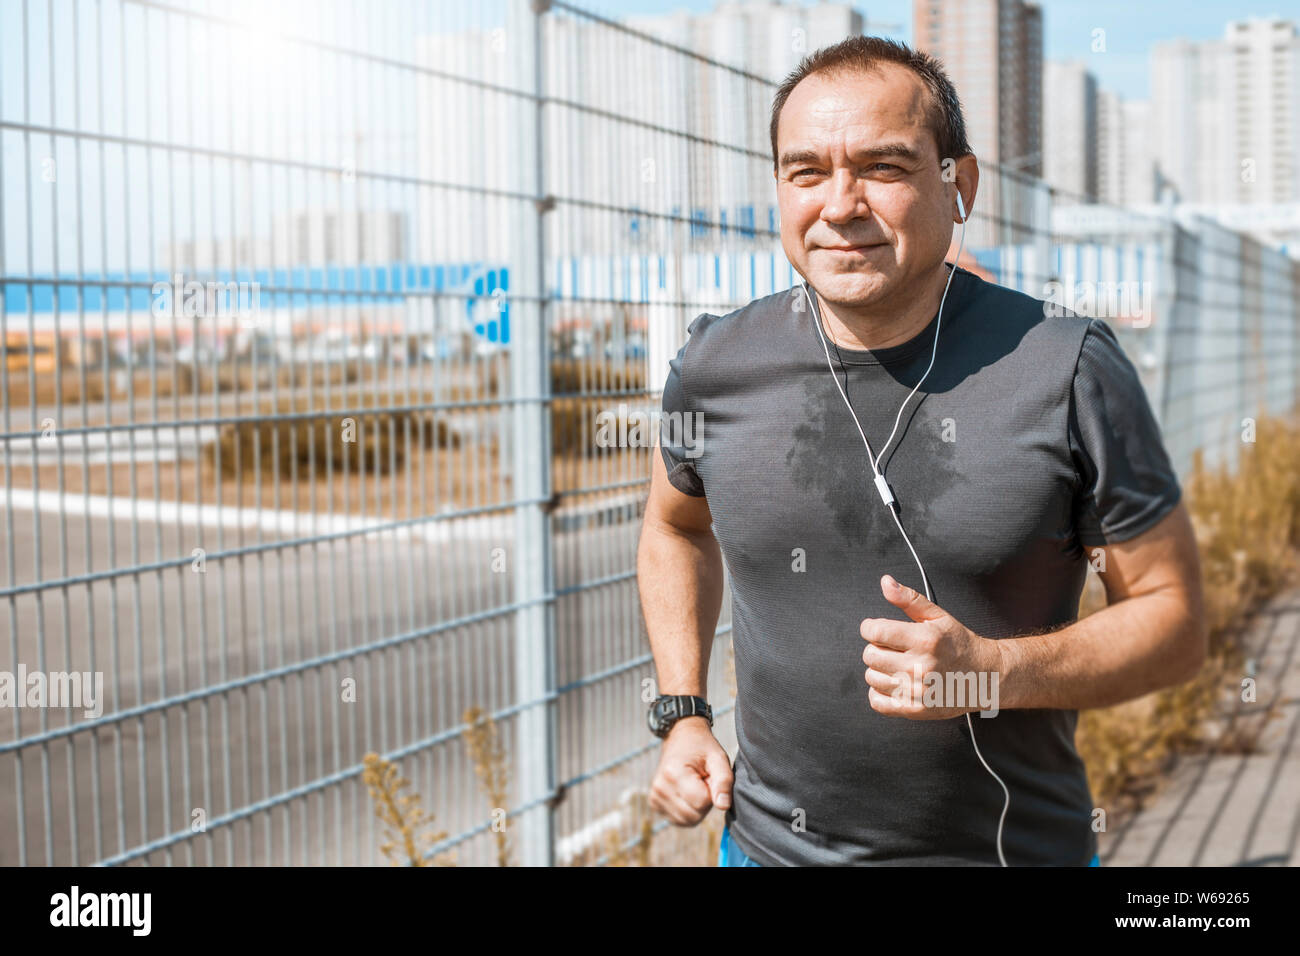 Mature man doing jogging on a city street. Senior man leads a healthy and active lifestyle playing sports. Stock Photo